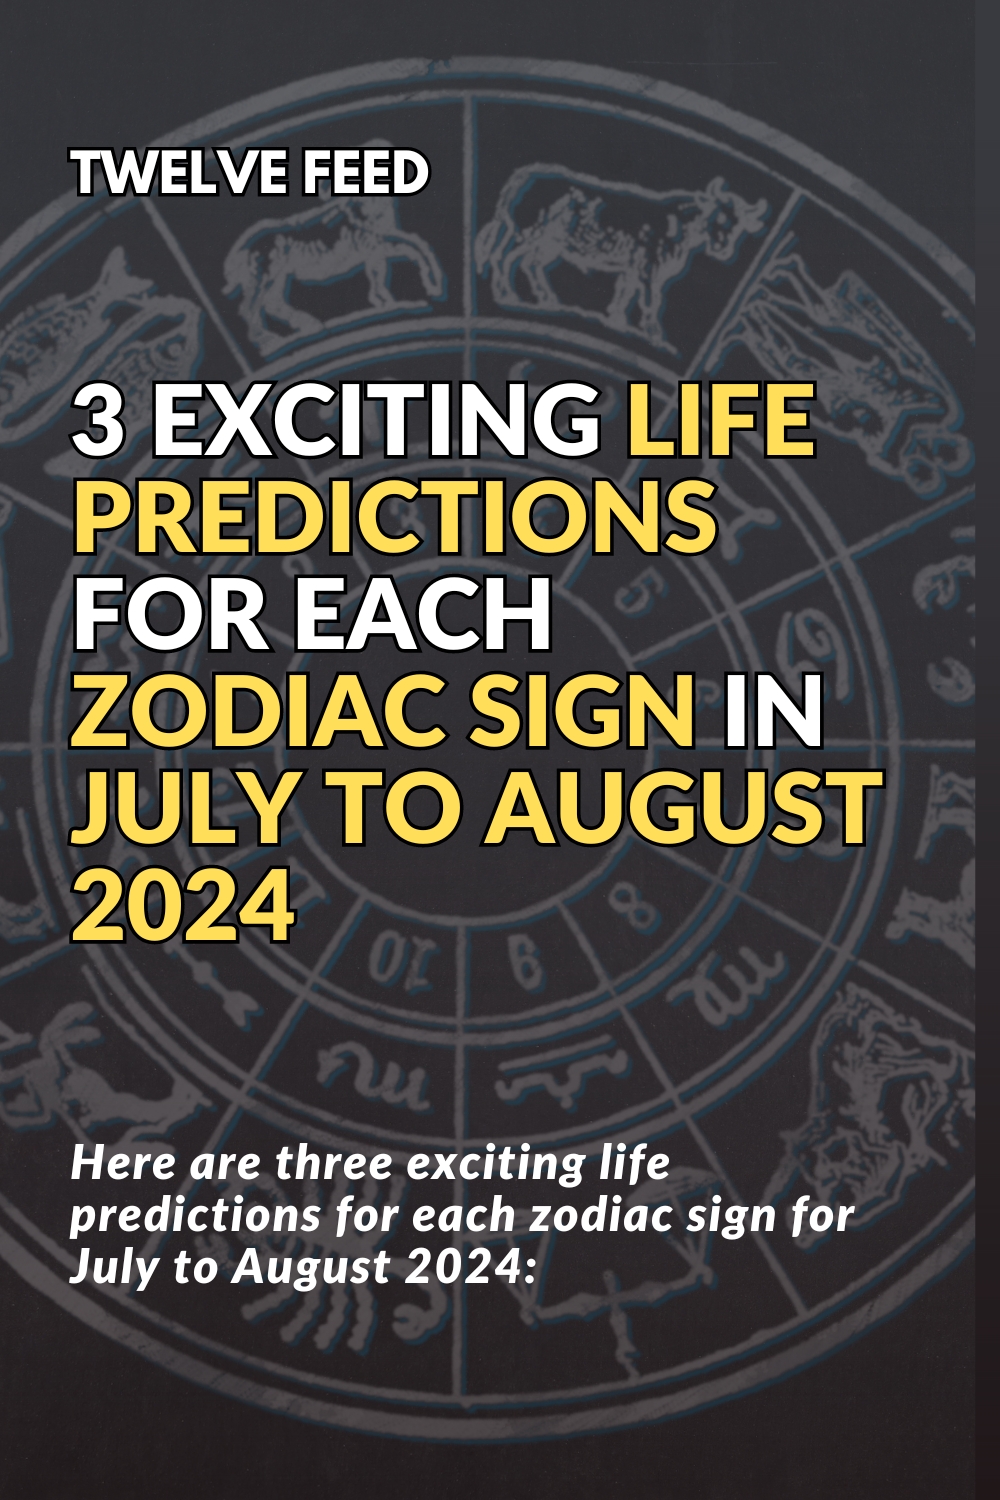 3 Exciting Life Predictions For Each Zodiac Sign In July To August 2024